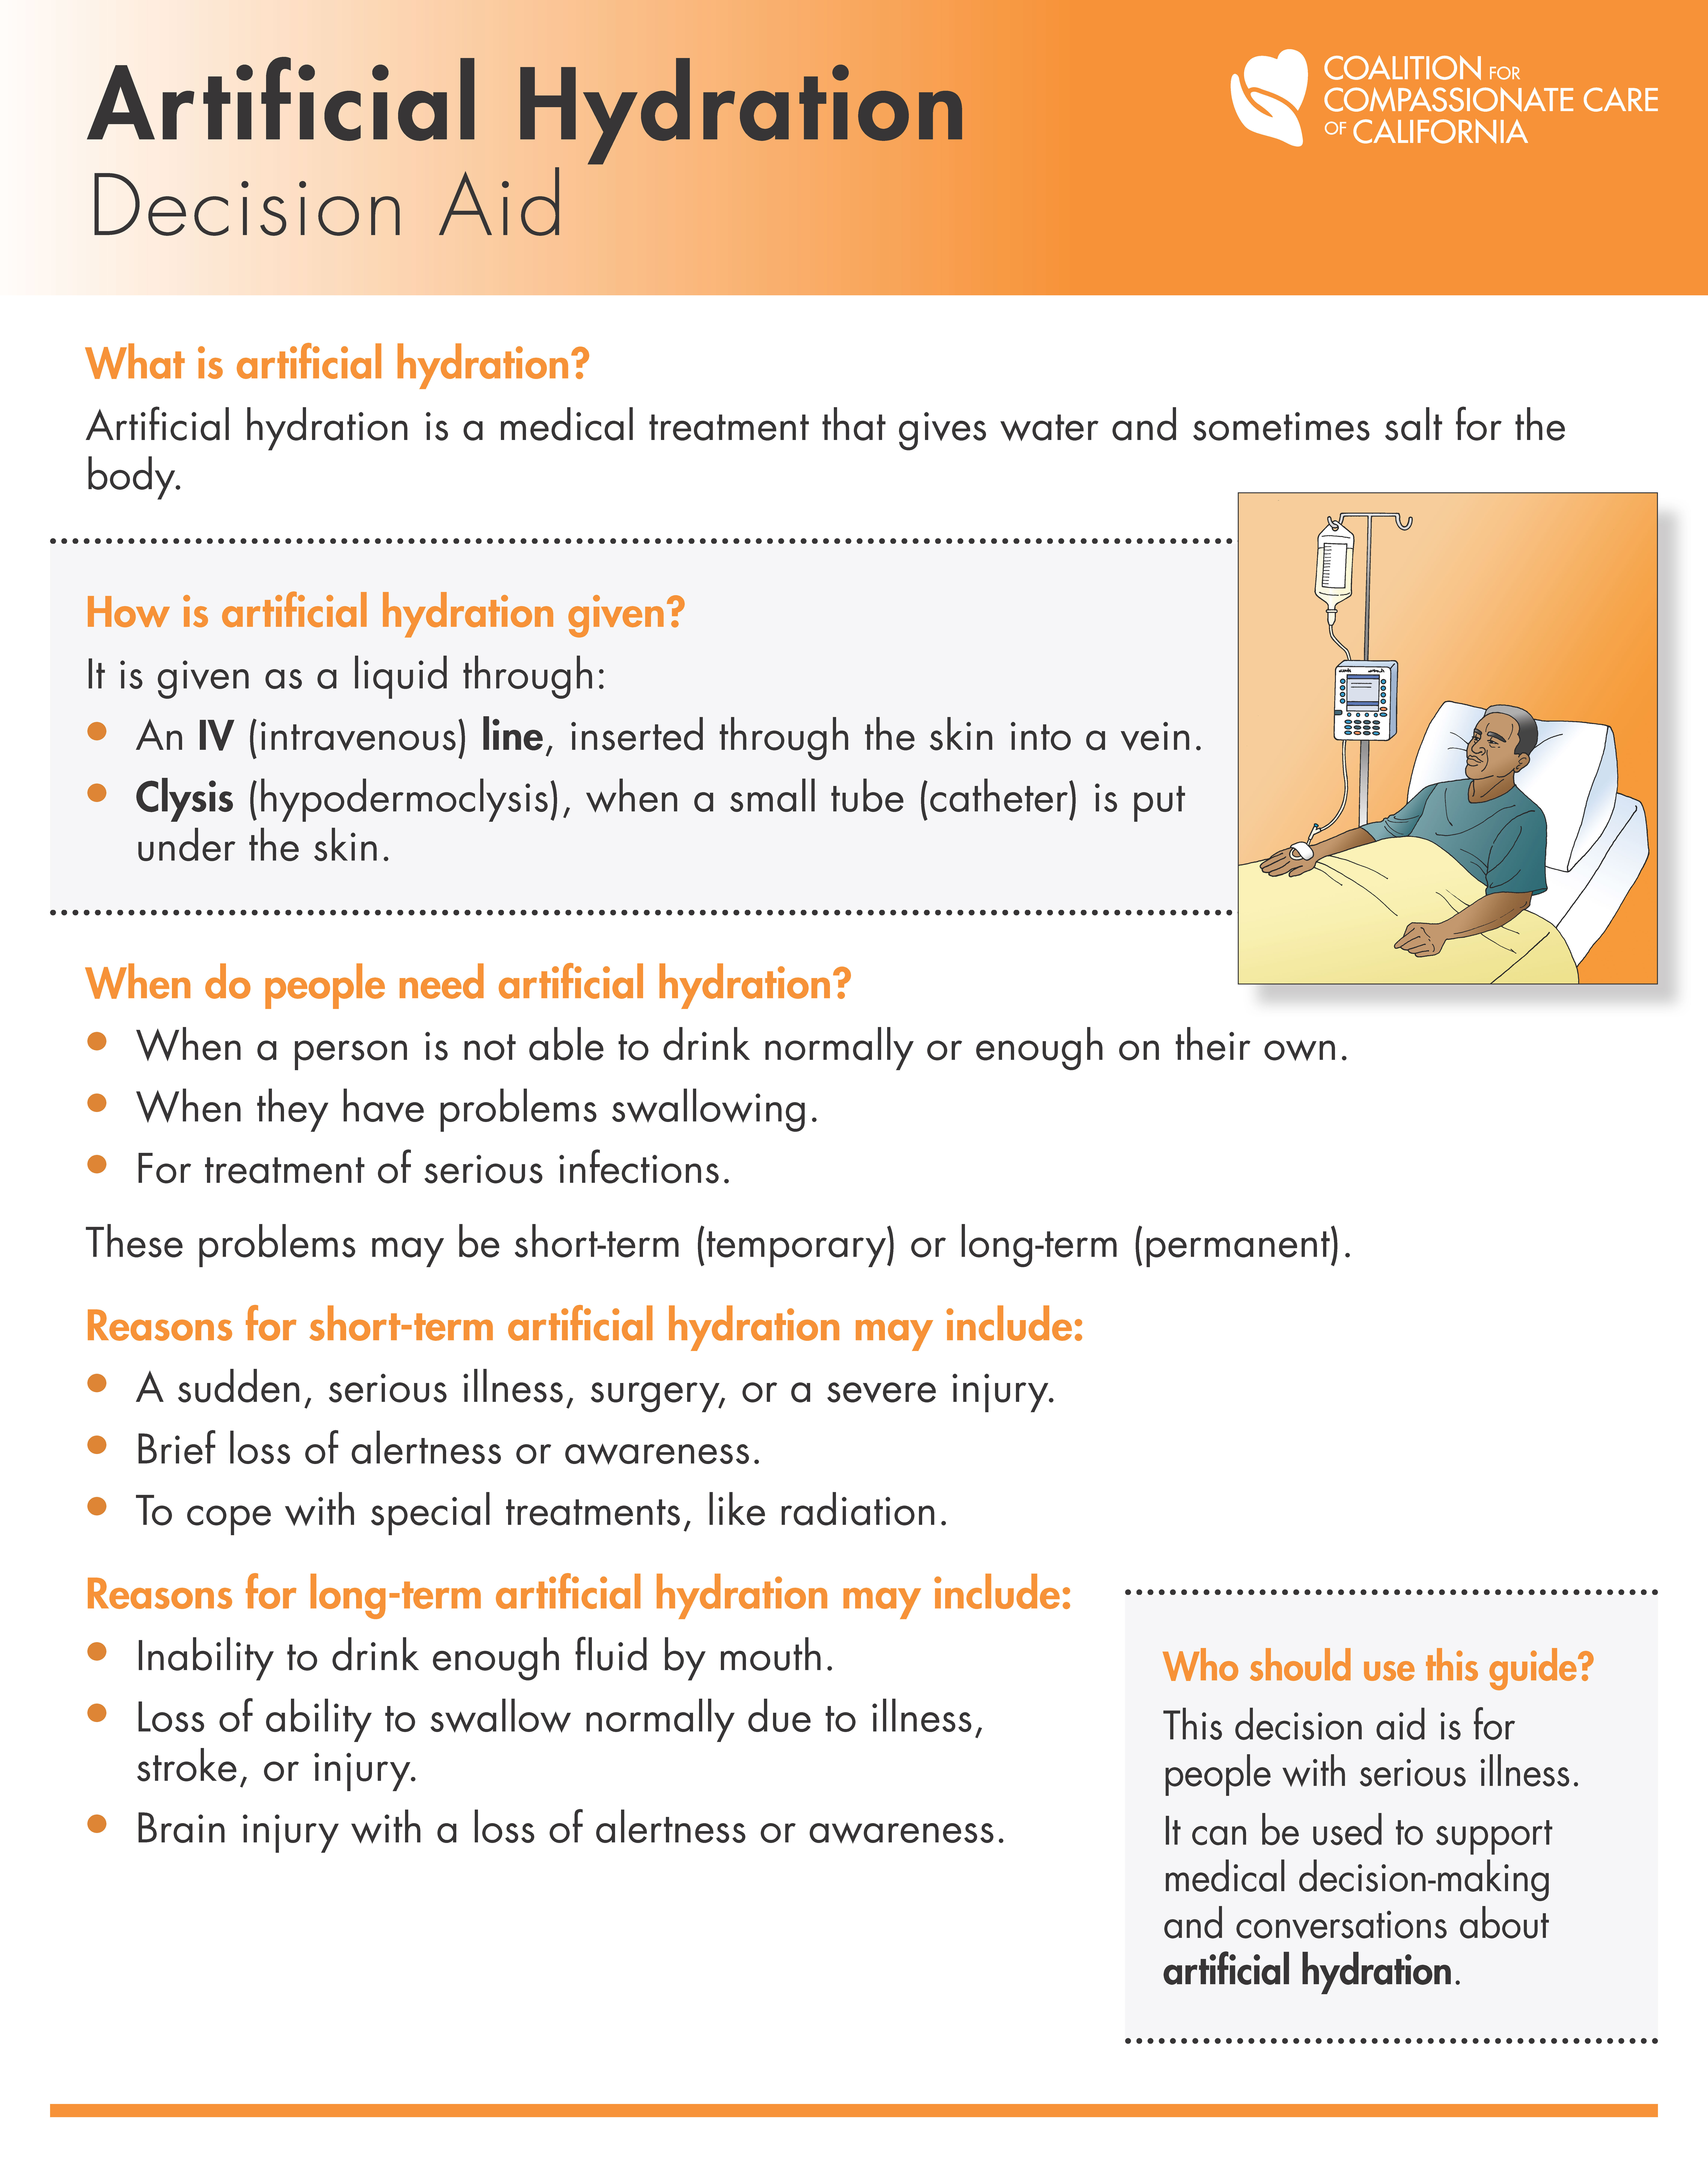 Decision Aid on Artificial Hydration - English